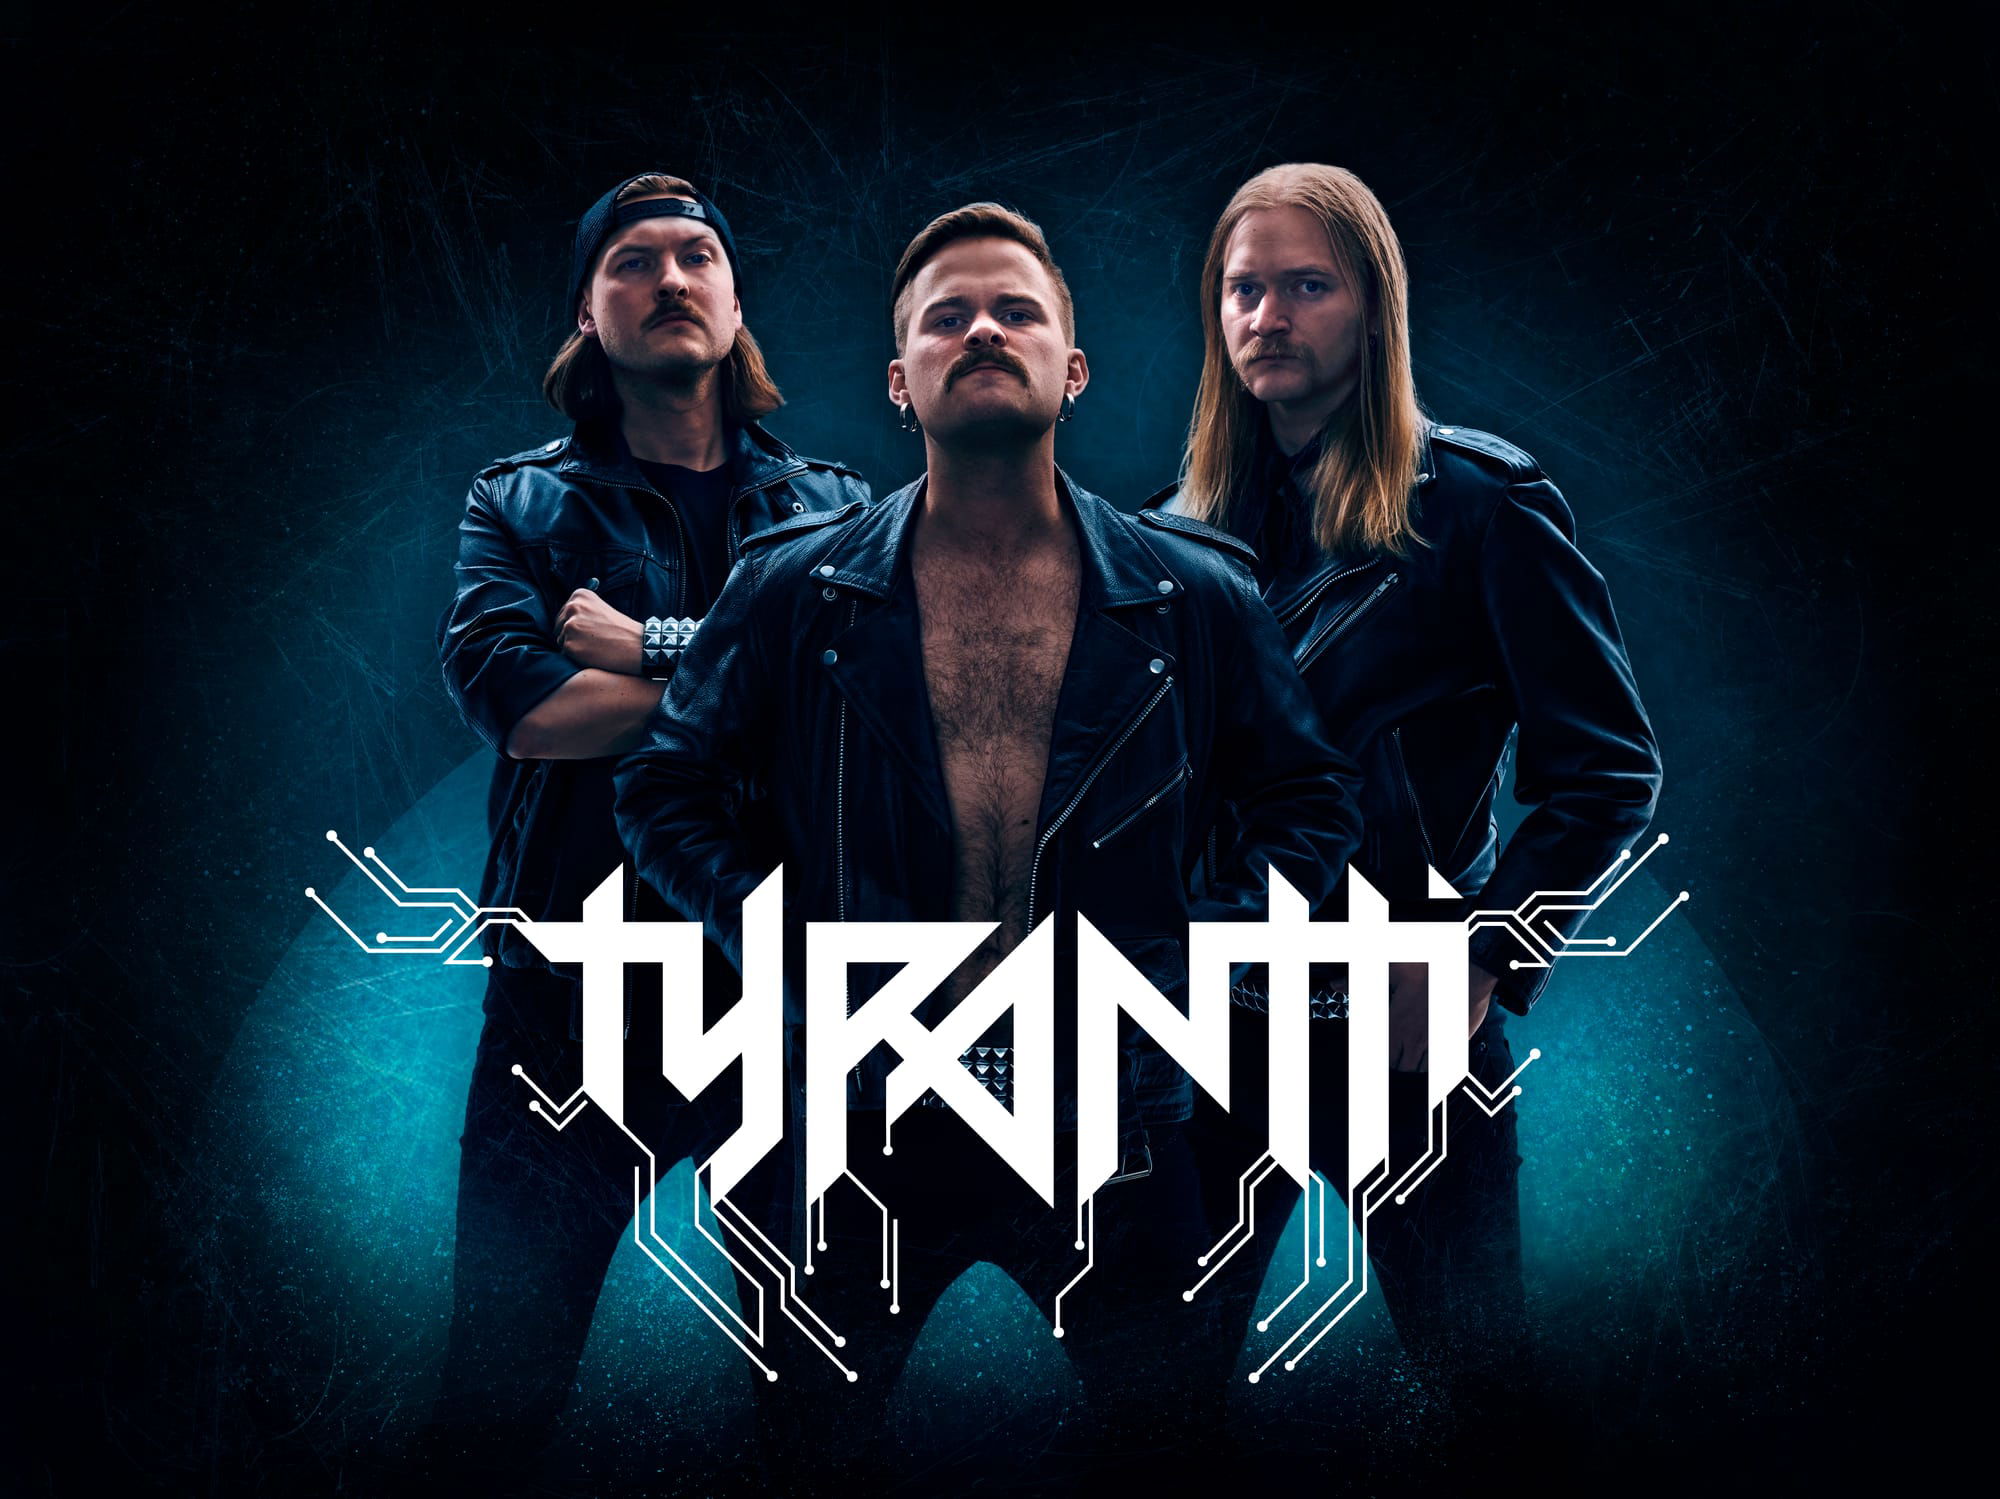 Interview with TYRANTTI